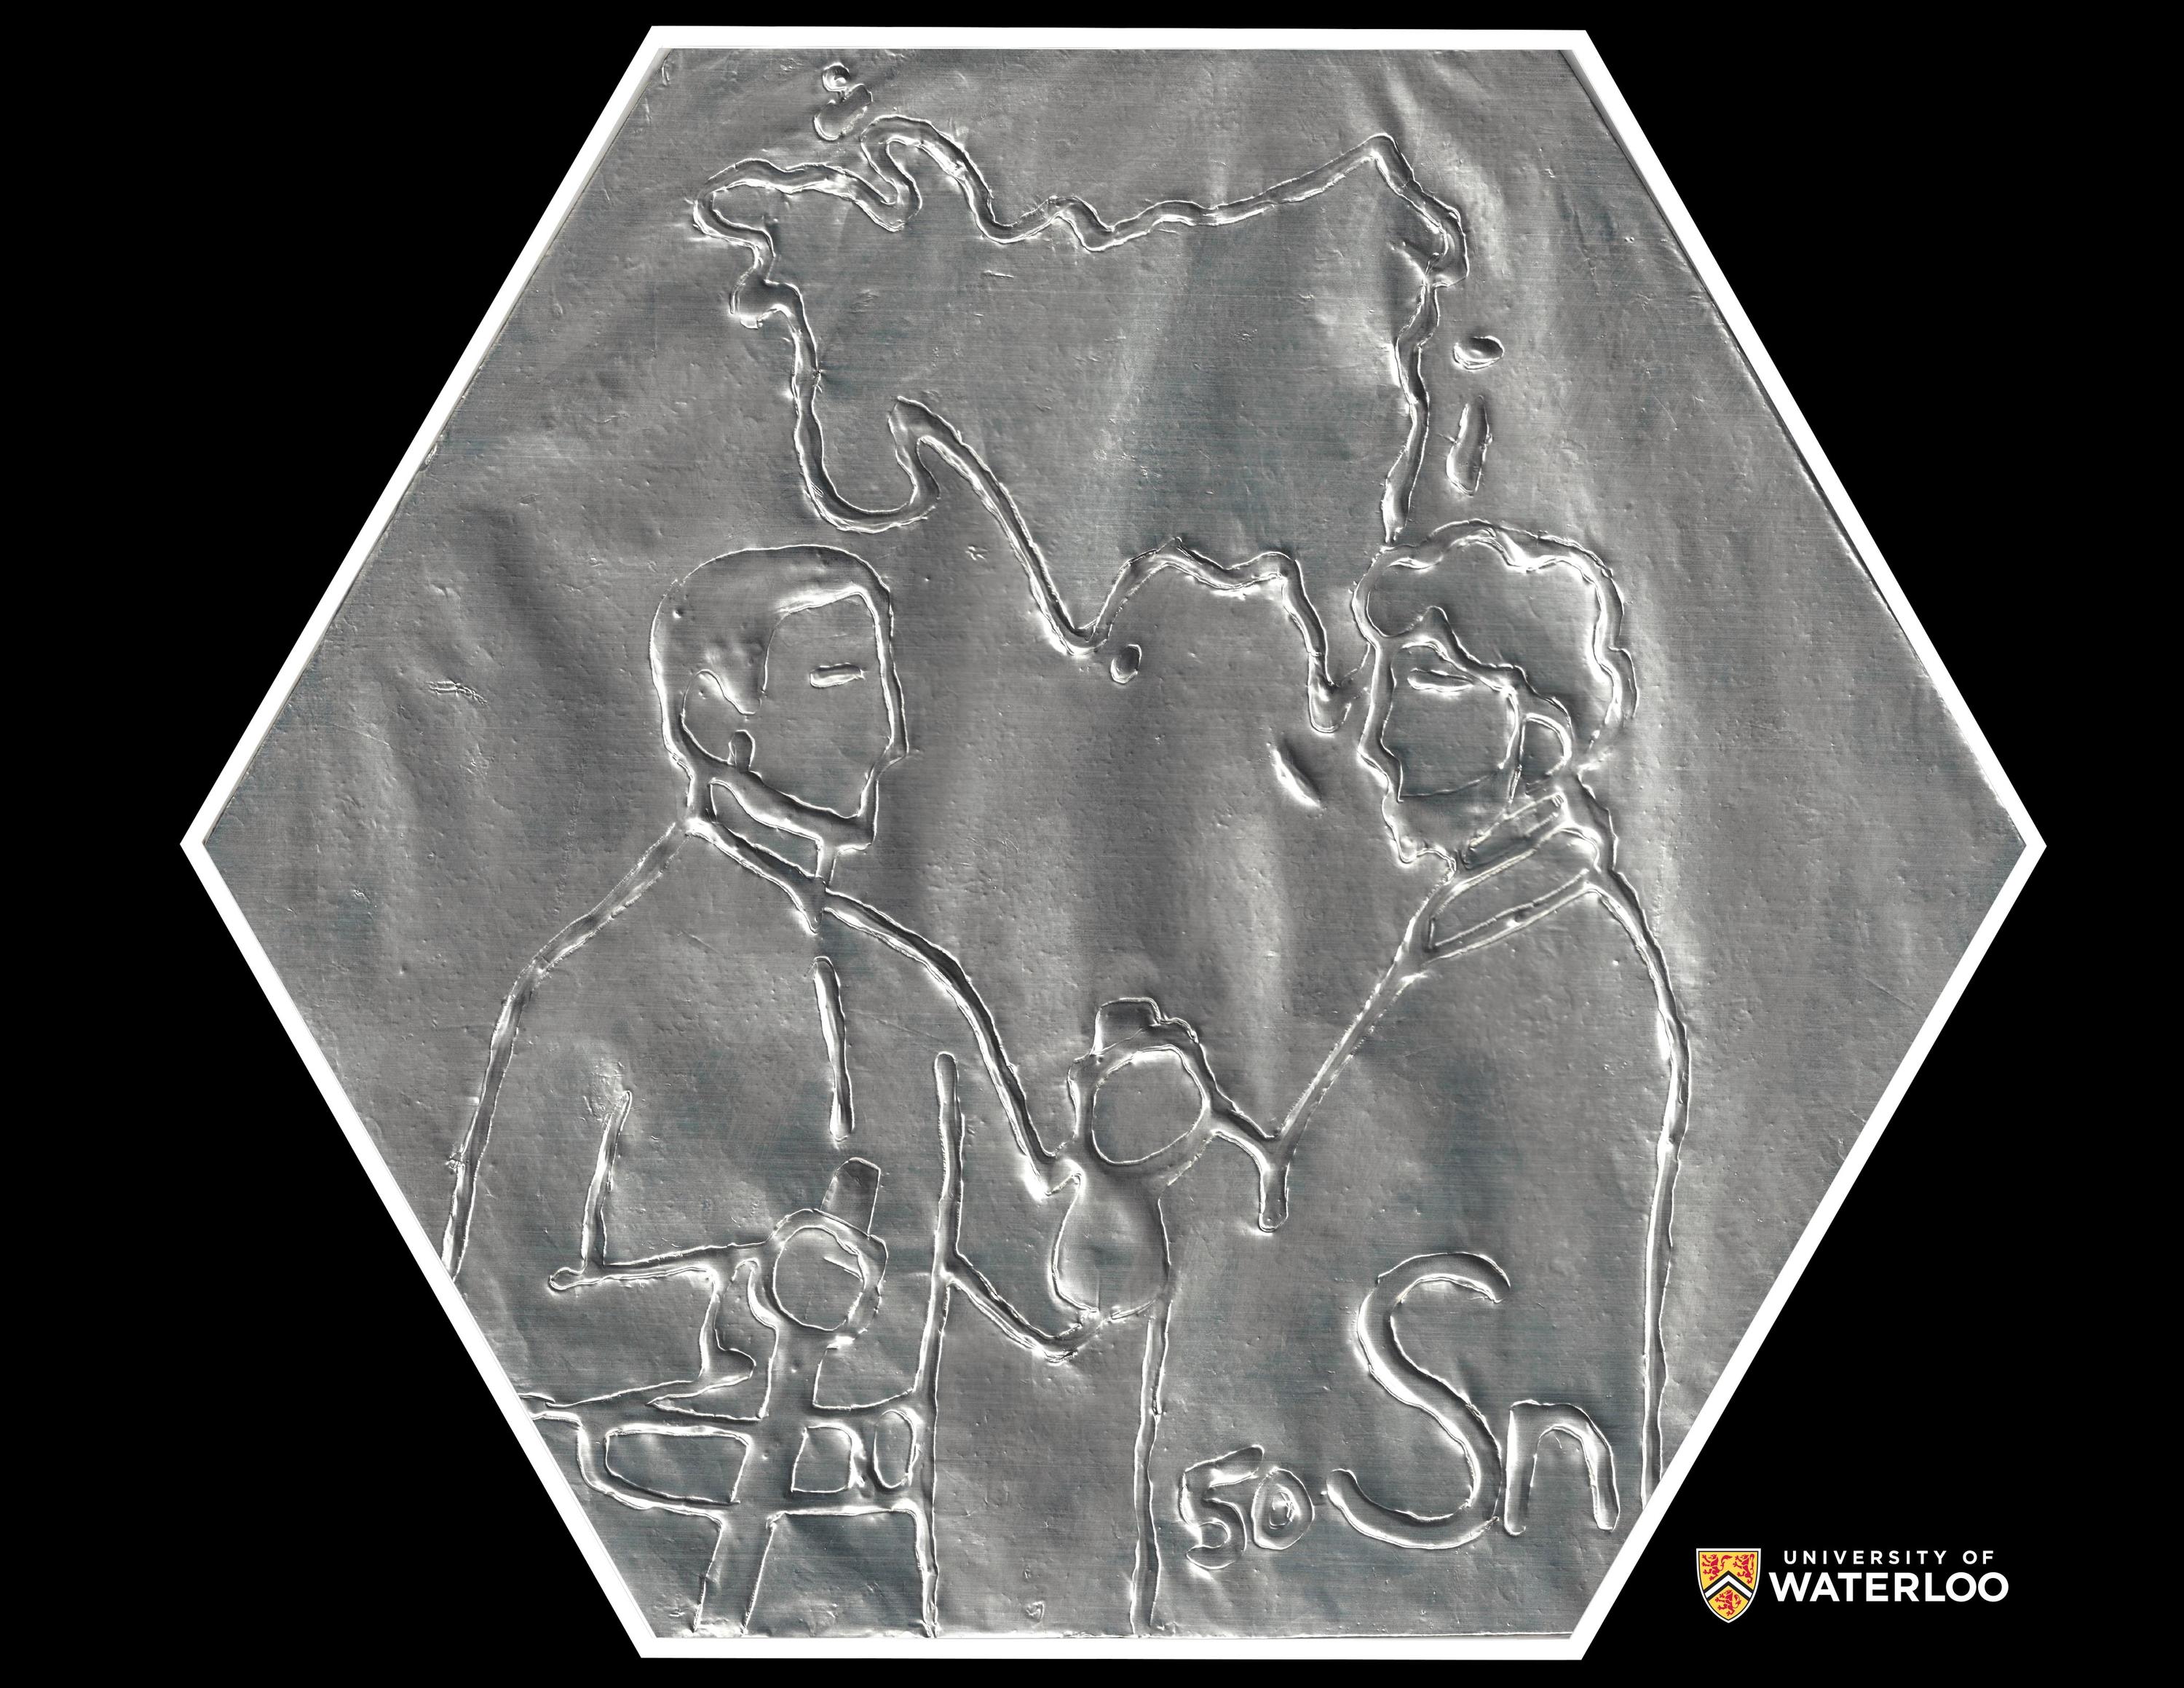 Tin foil relief over cardboard and glue base. Chemical symbol “Sn” and atomic number “50” appear in the lower right corner. Centre are two Bronze Age figures (one holding a sword) trading bronze coins. Above them, a map of Eurasia.